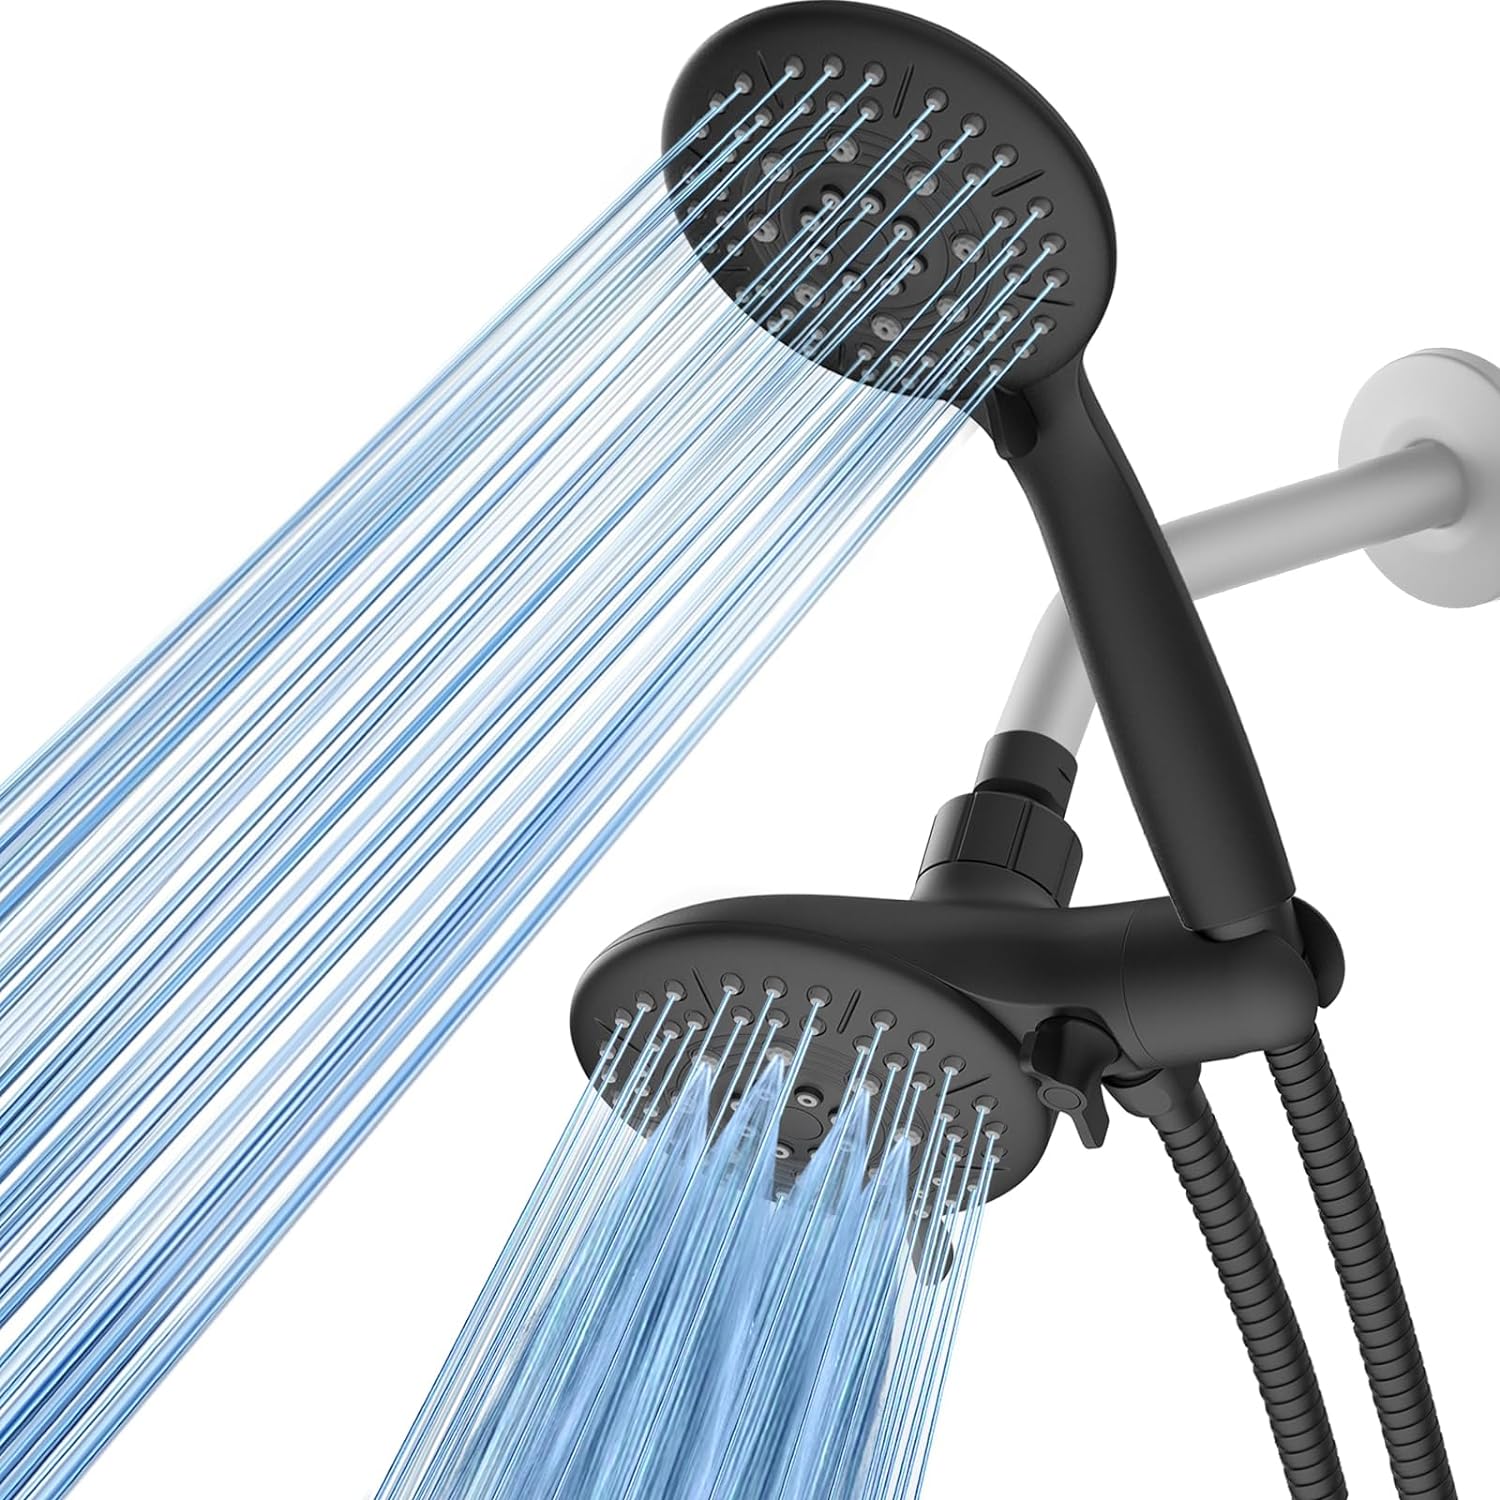 Cobbe 48-Setting High Pressure 3-Way Shower Head Combo, Hand Held Shower & Rain Shower Separately or Together, 4.7